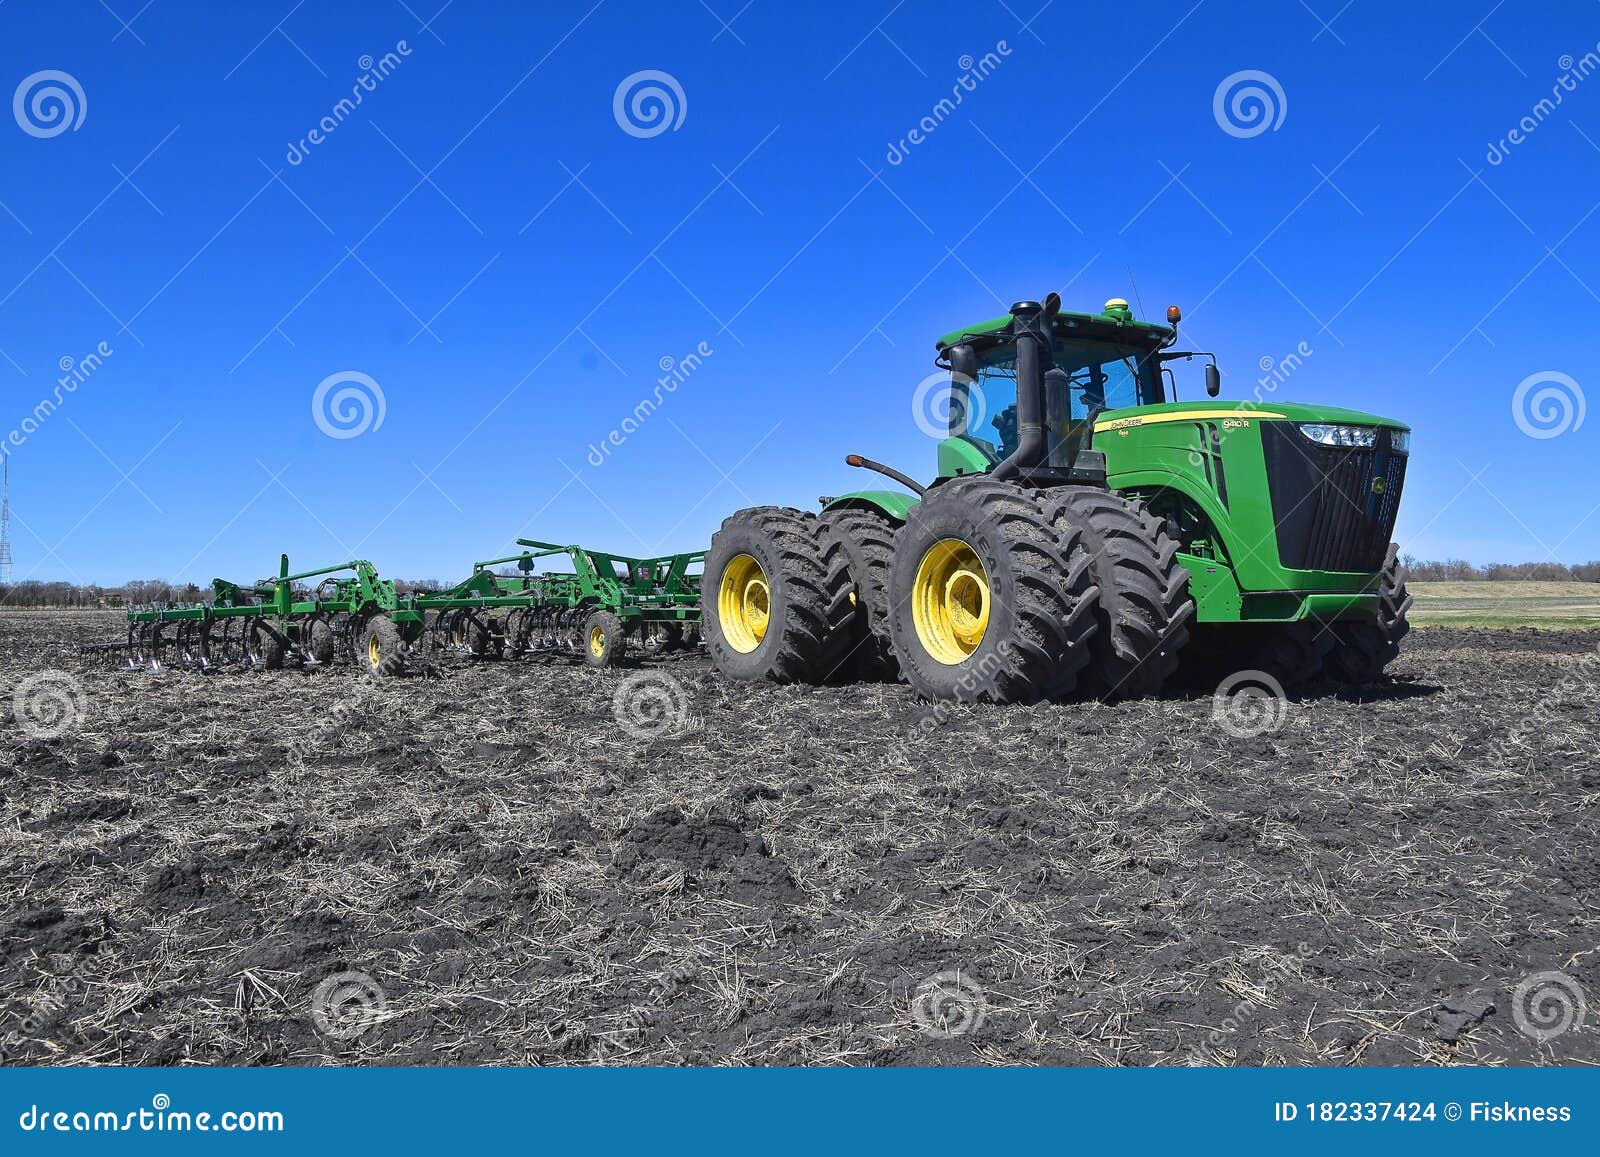 John Deere 94r Tractor Digging A Field For Spring Planting Editorial Stock Image Image Of John Tractor